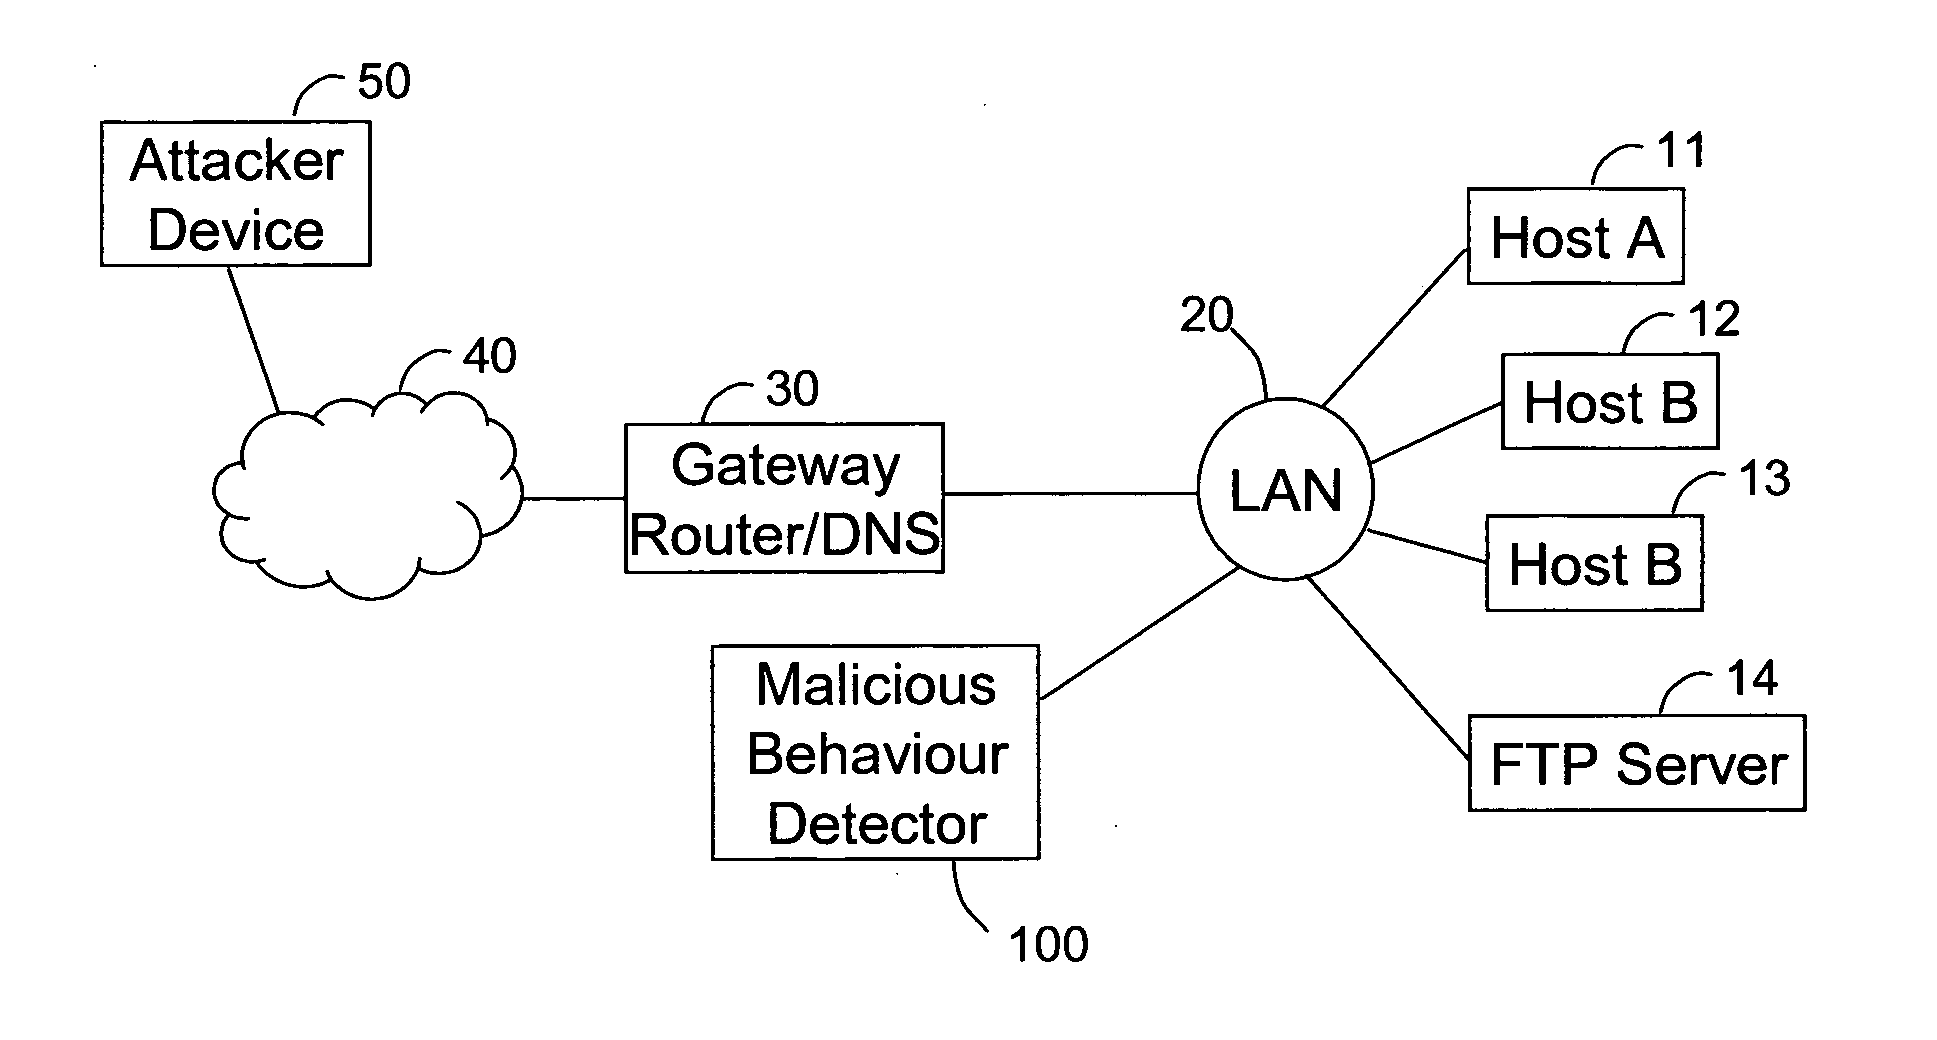 Detecting malicious behaviour on a computer network